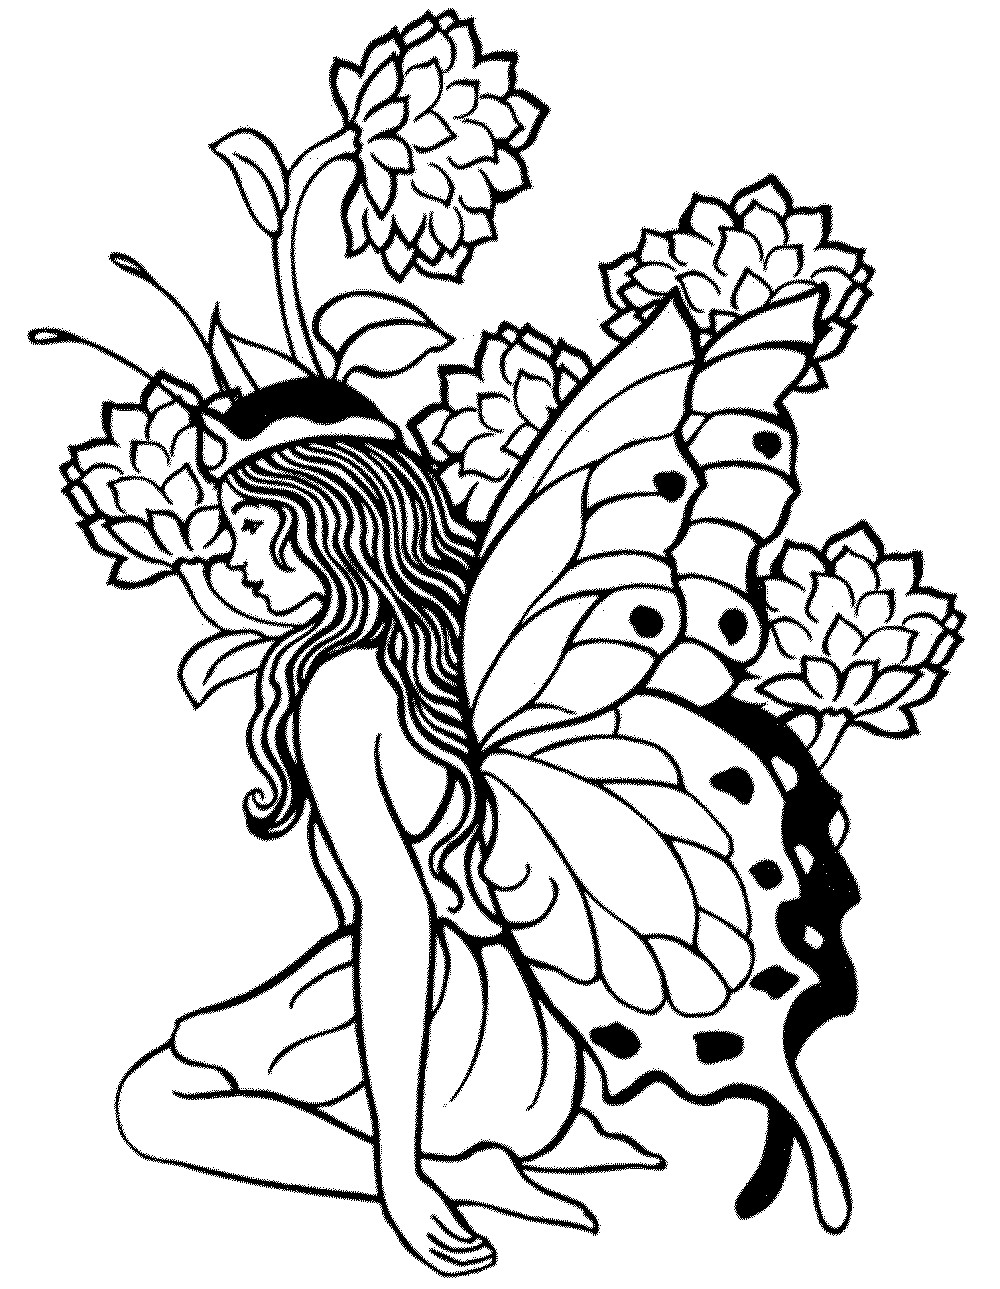 Coloring Pages For Adults Free
 Free Coloring Pages For Adults Printable Detailed Image 23